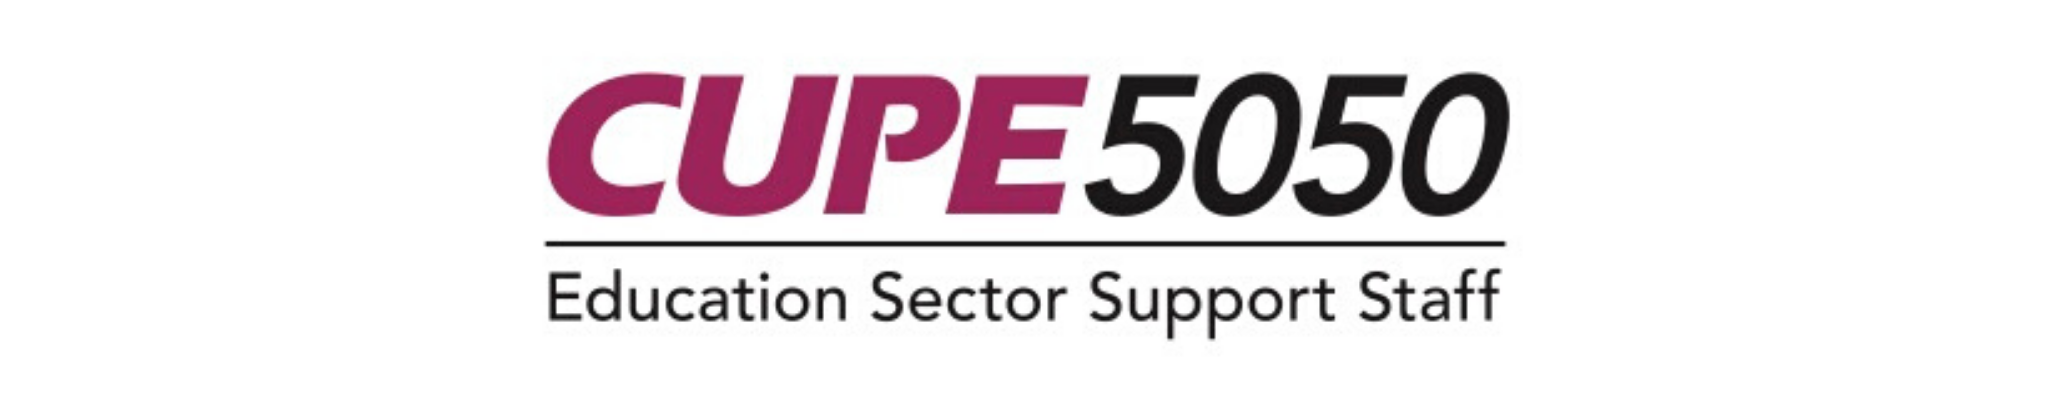 CUPE 5050